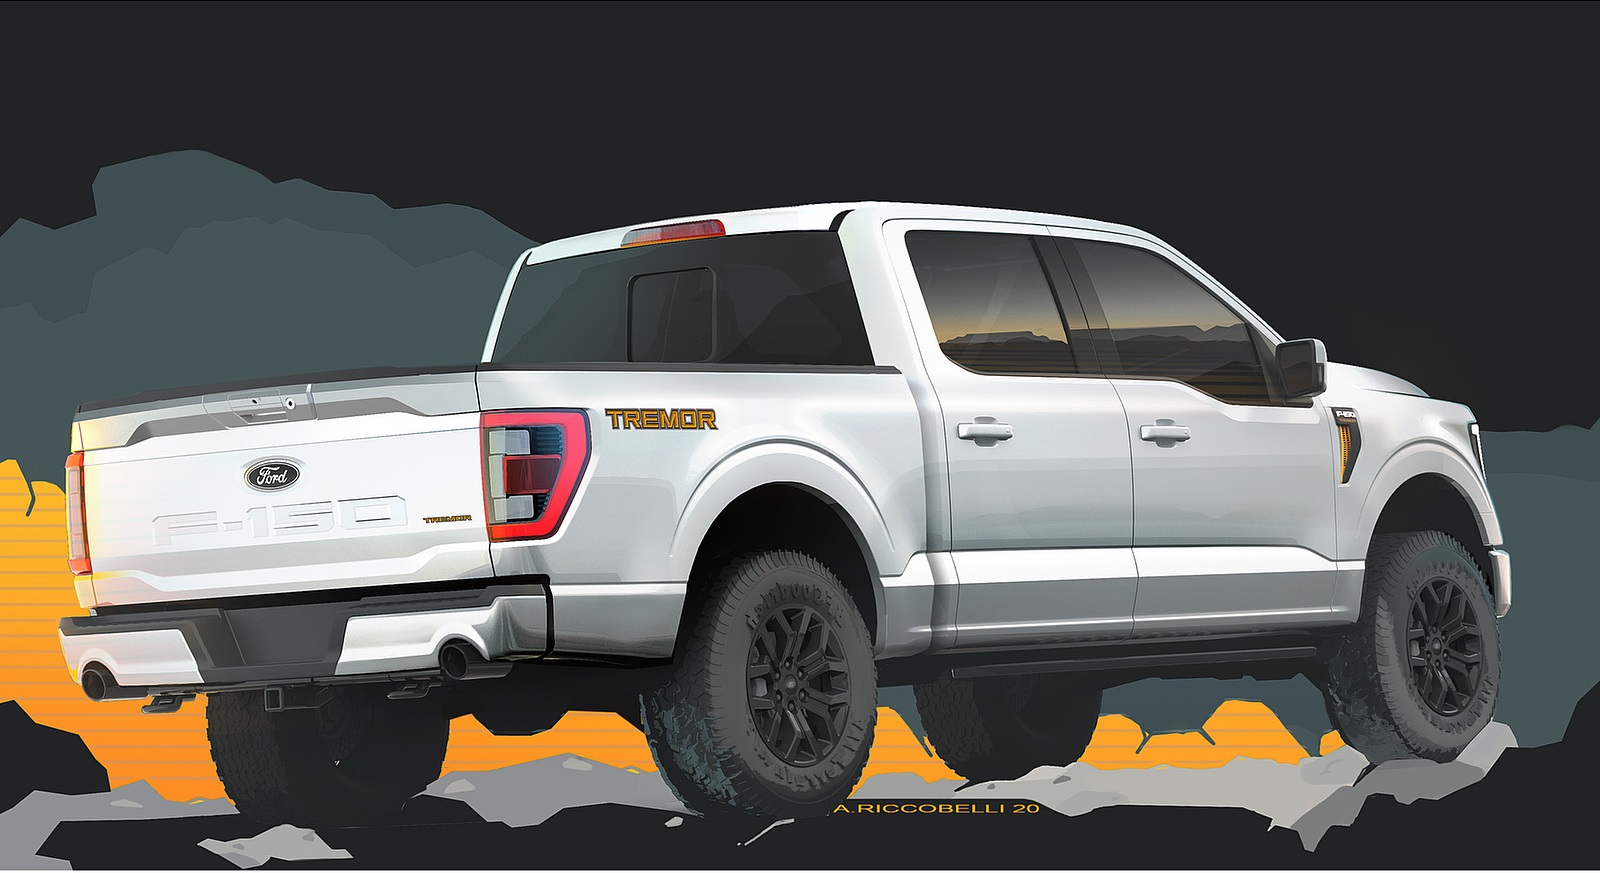 2021 Ford F-150 Tremor Design Sketch Wallpapers #26 of 26